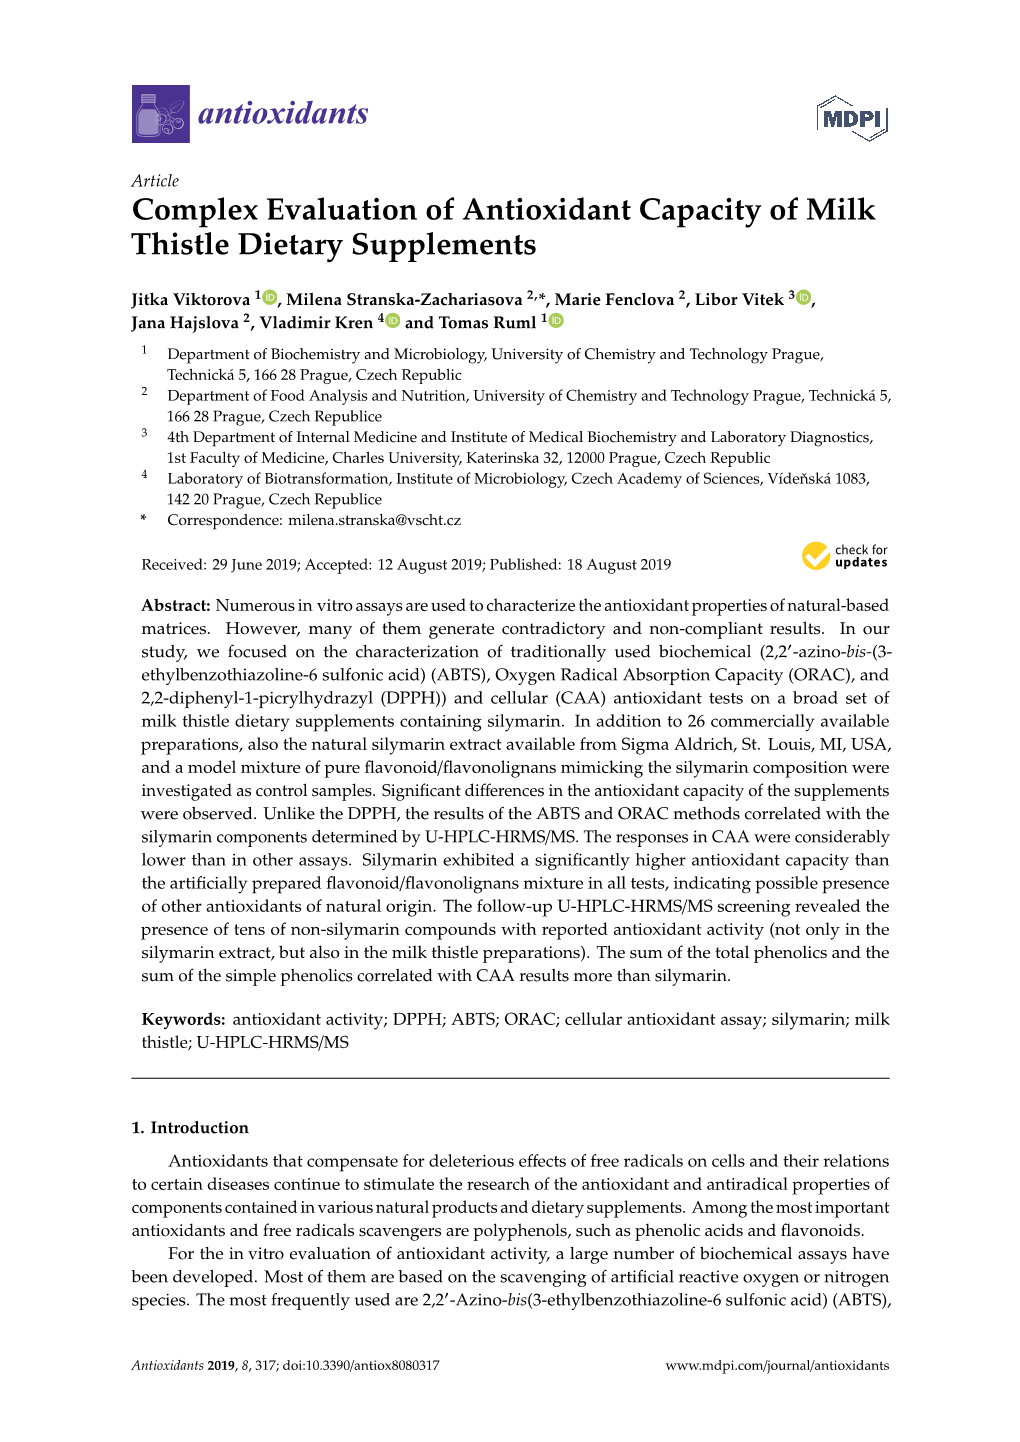 Complex Evaluation of Antioxidant Capacity of Milk Thistle Dietary Supplements